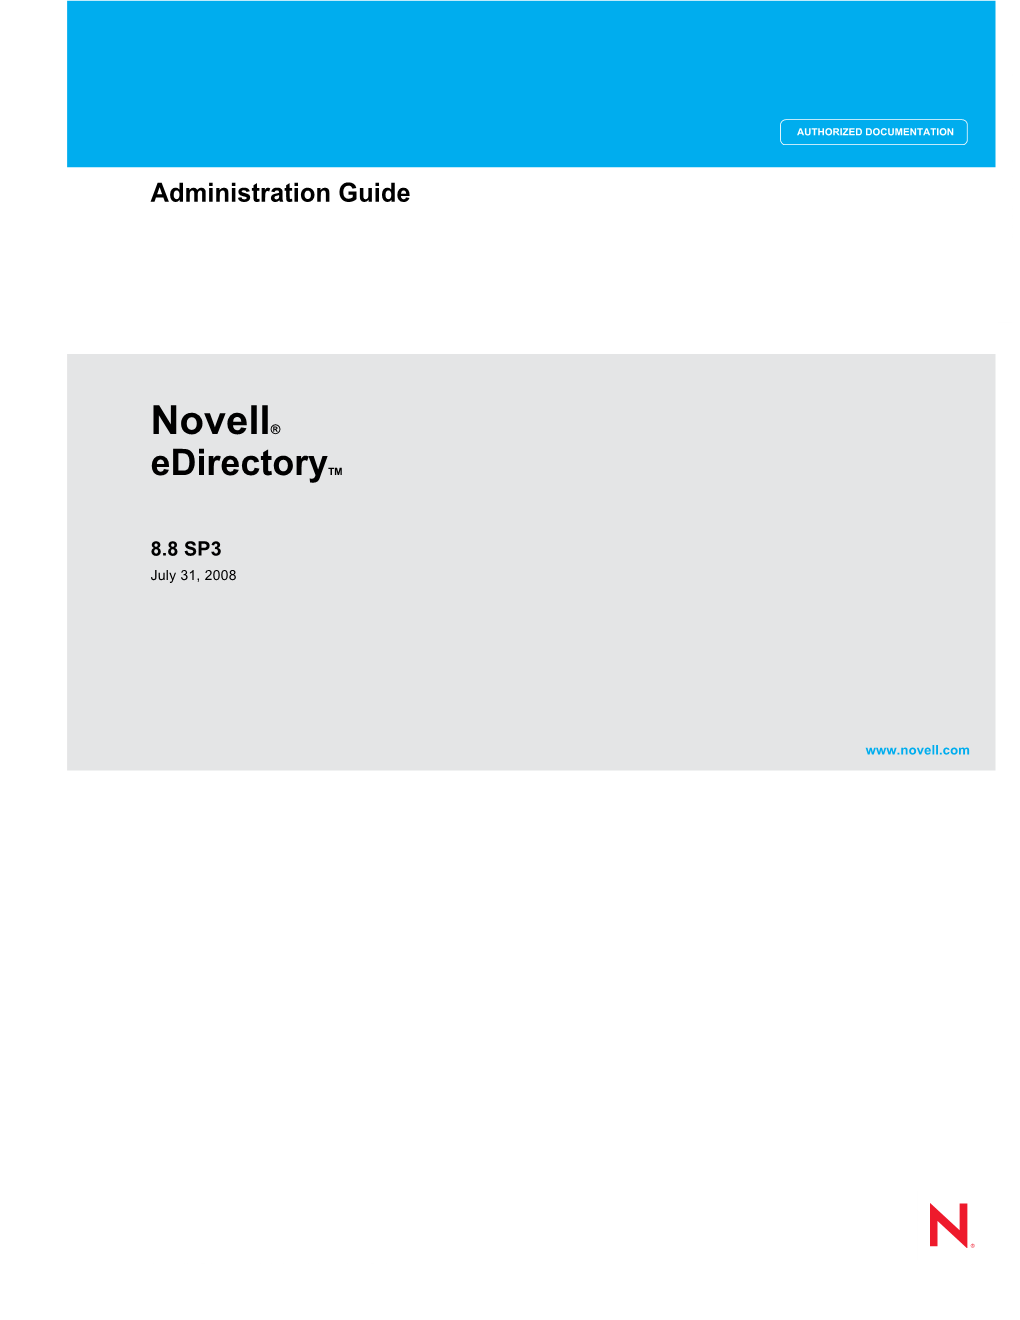 Novell Edirectory 8.8 Administration Guide Novdocx (En) 11 July 2008 Onry End Uses